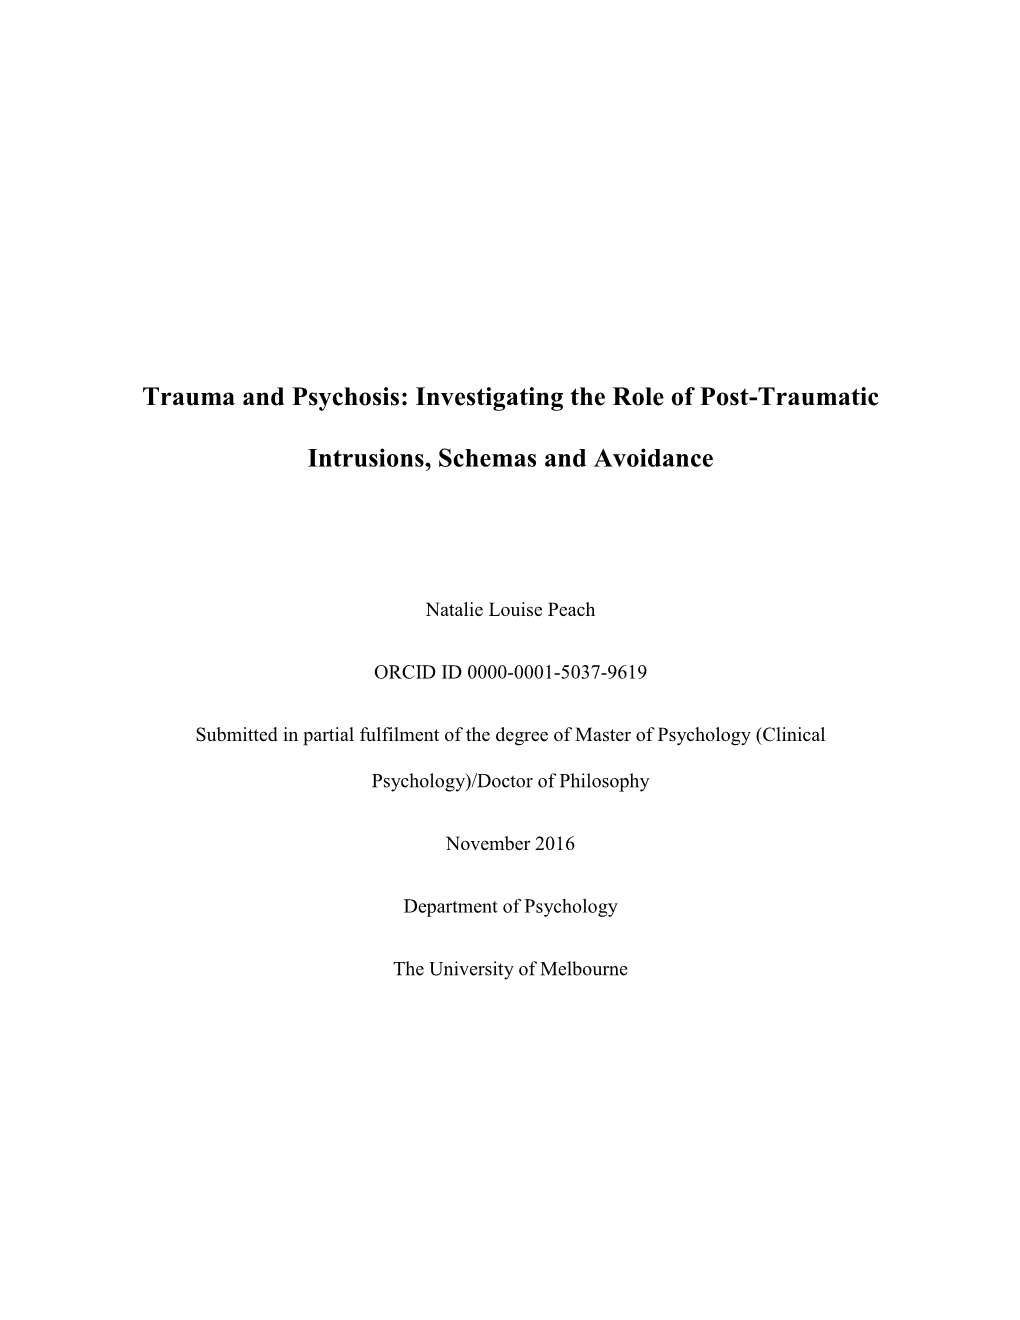 Trauma and Psychosis: Investigating the Role of Post-Traumatic Intrusions, Schemas and Avoidance